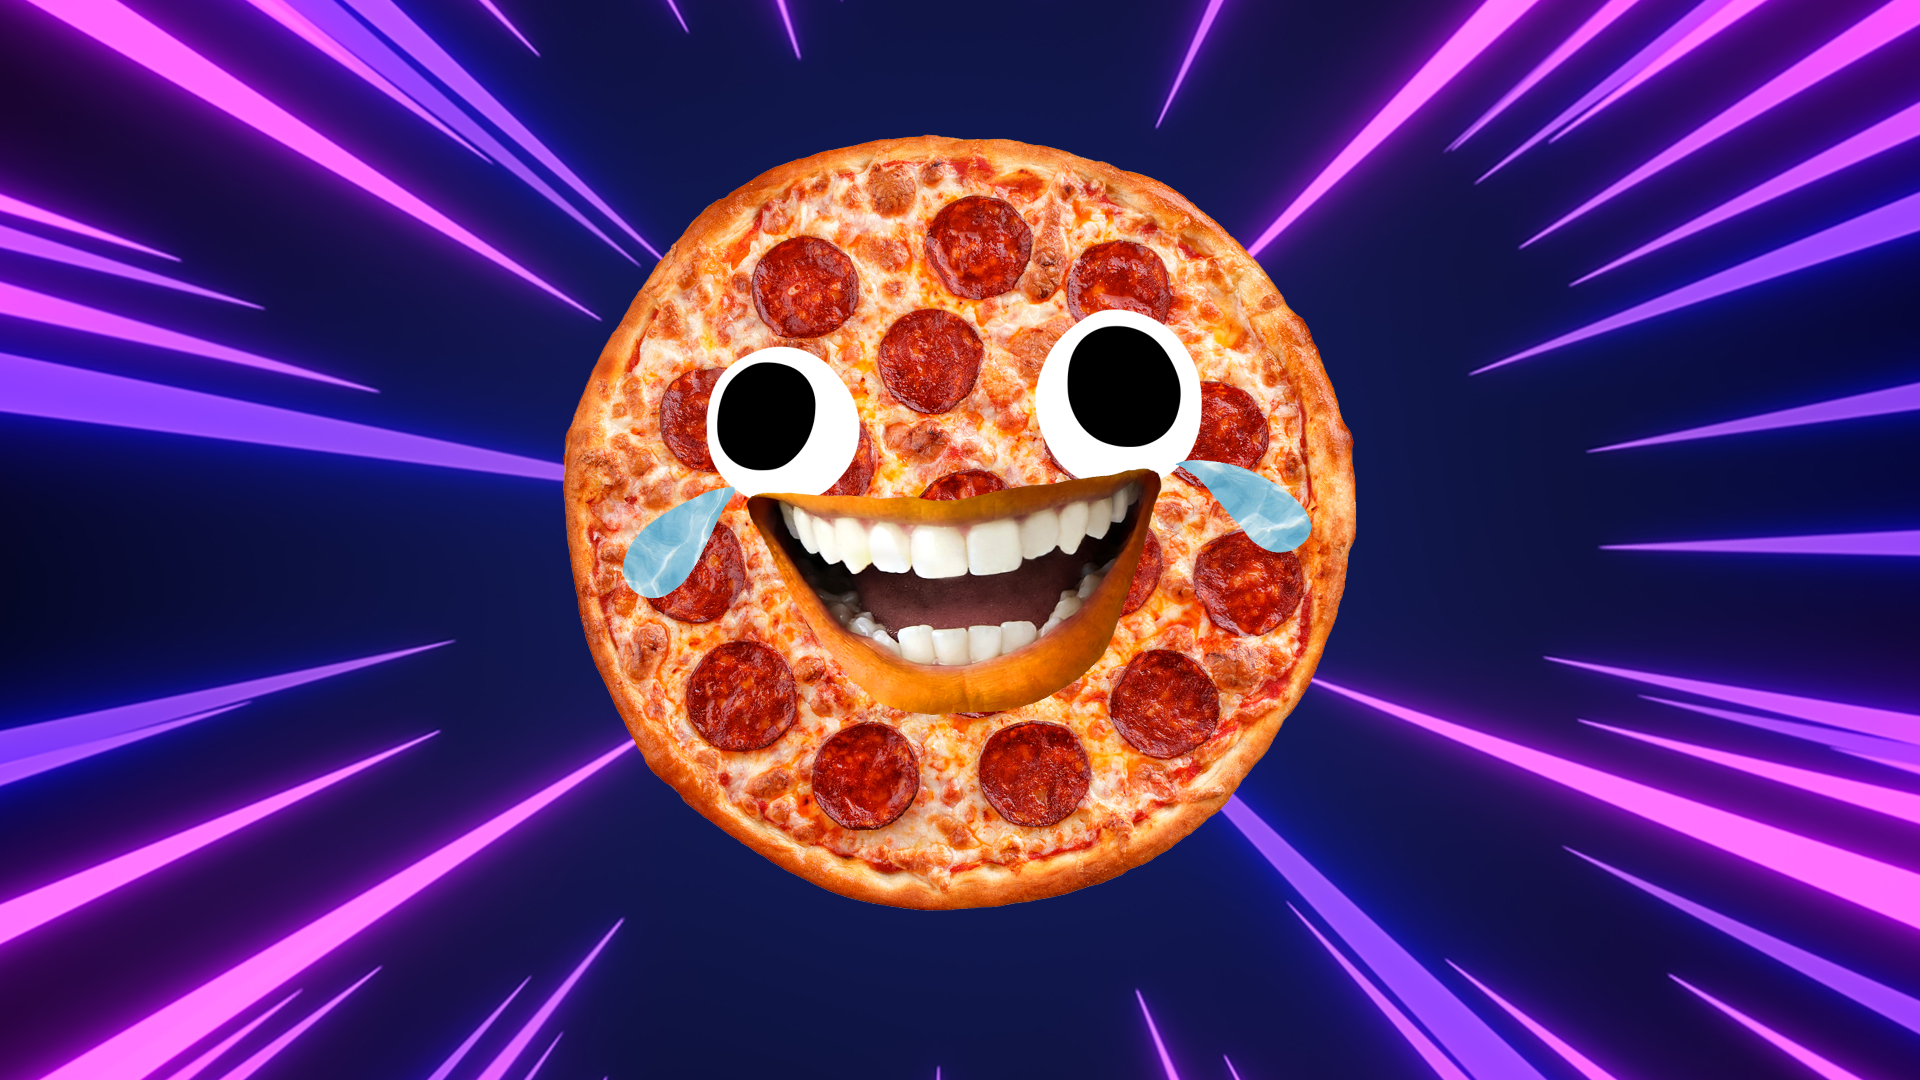 Crying laughing pizza